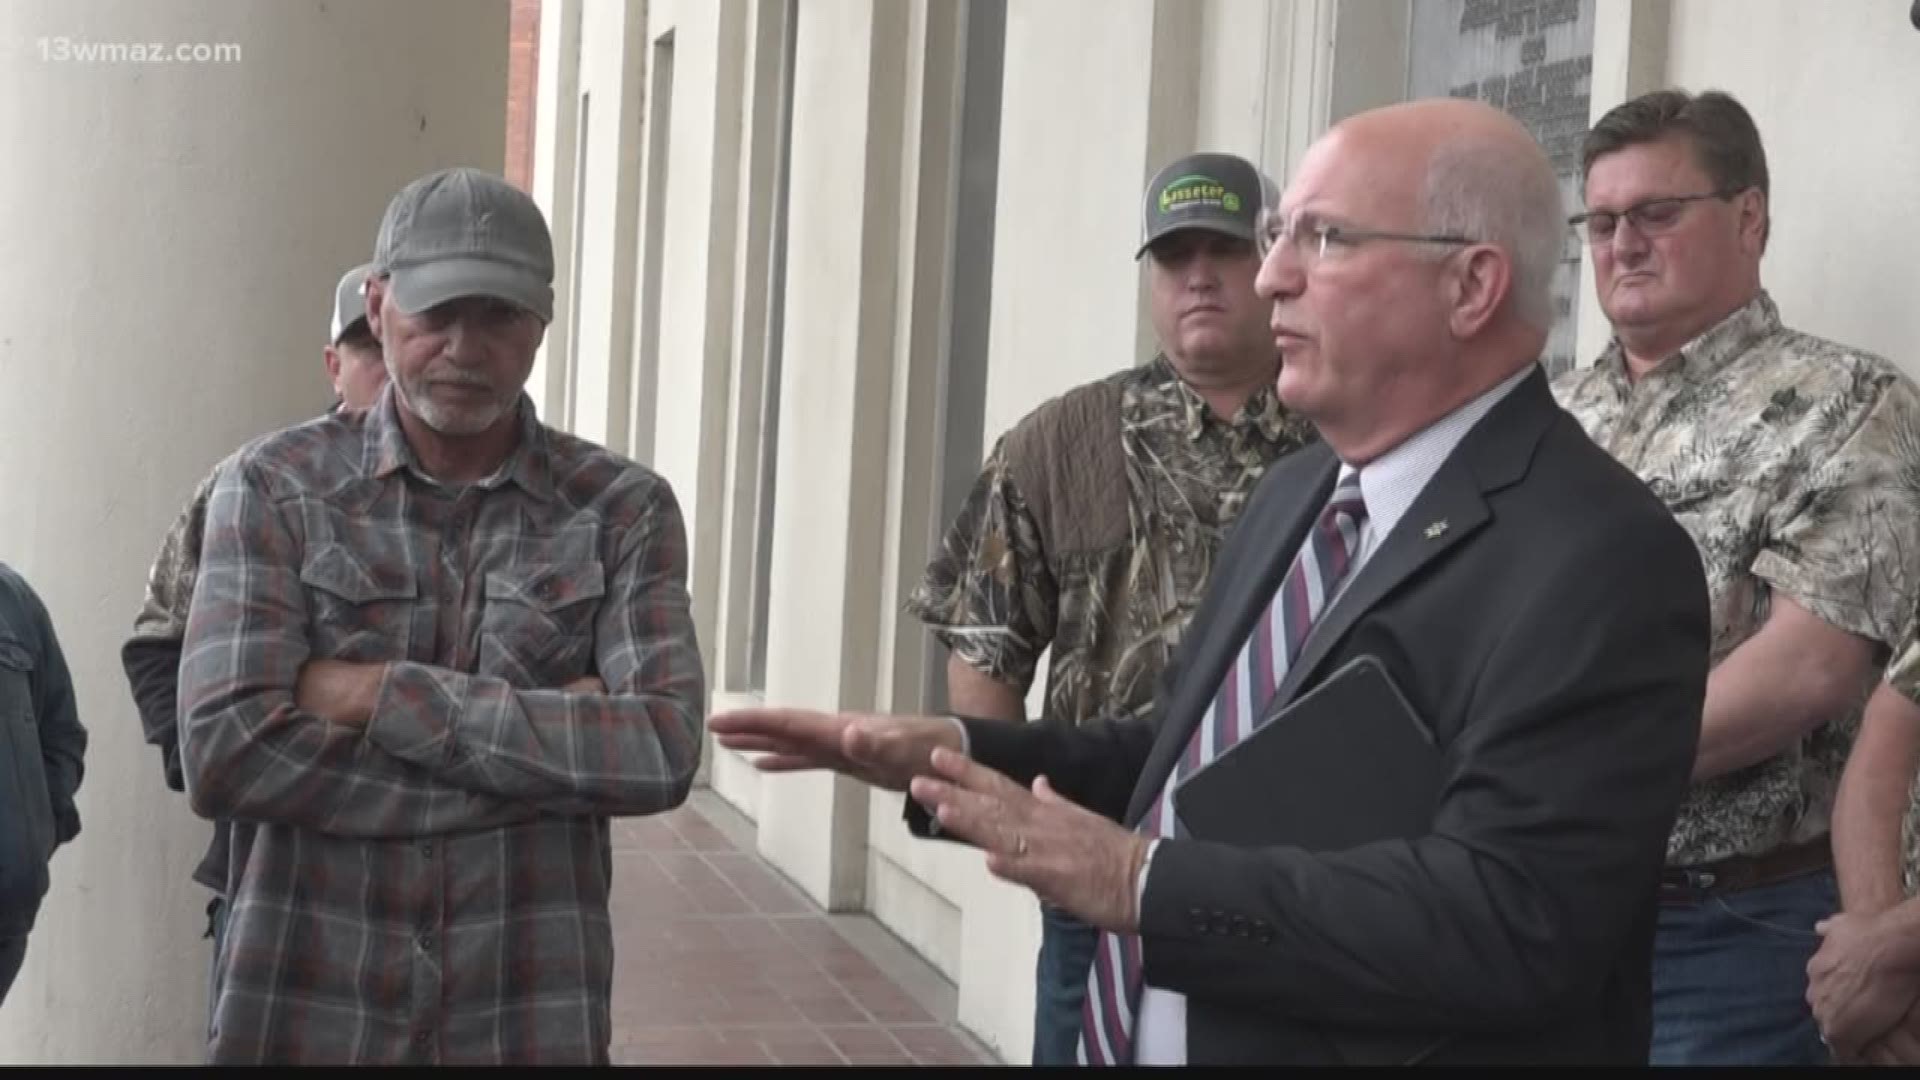 A dispute over Bibb County hunting rules got personal in one neighborhood. The county is considering a rule banning hunters from shooting within 250 feet of a home.